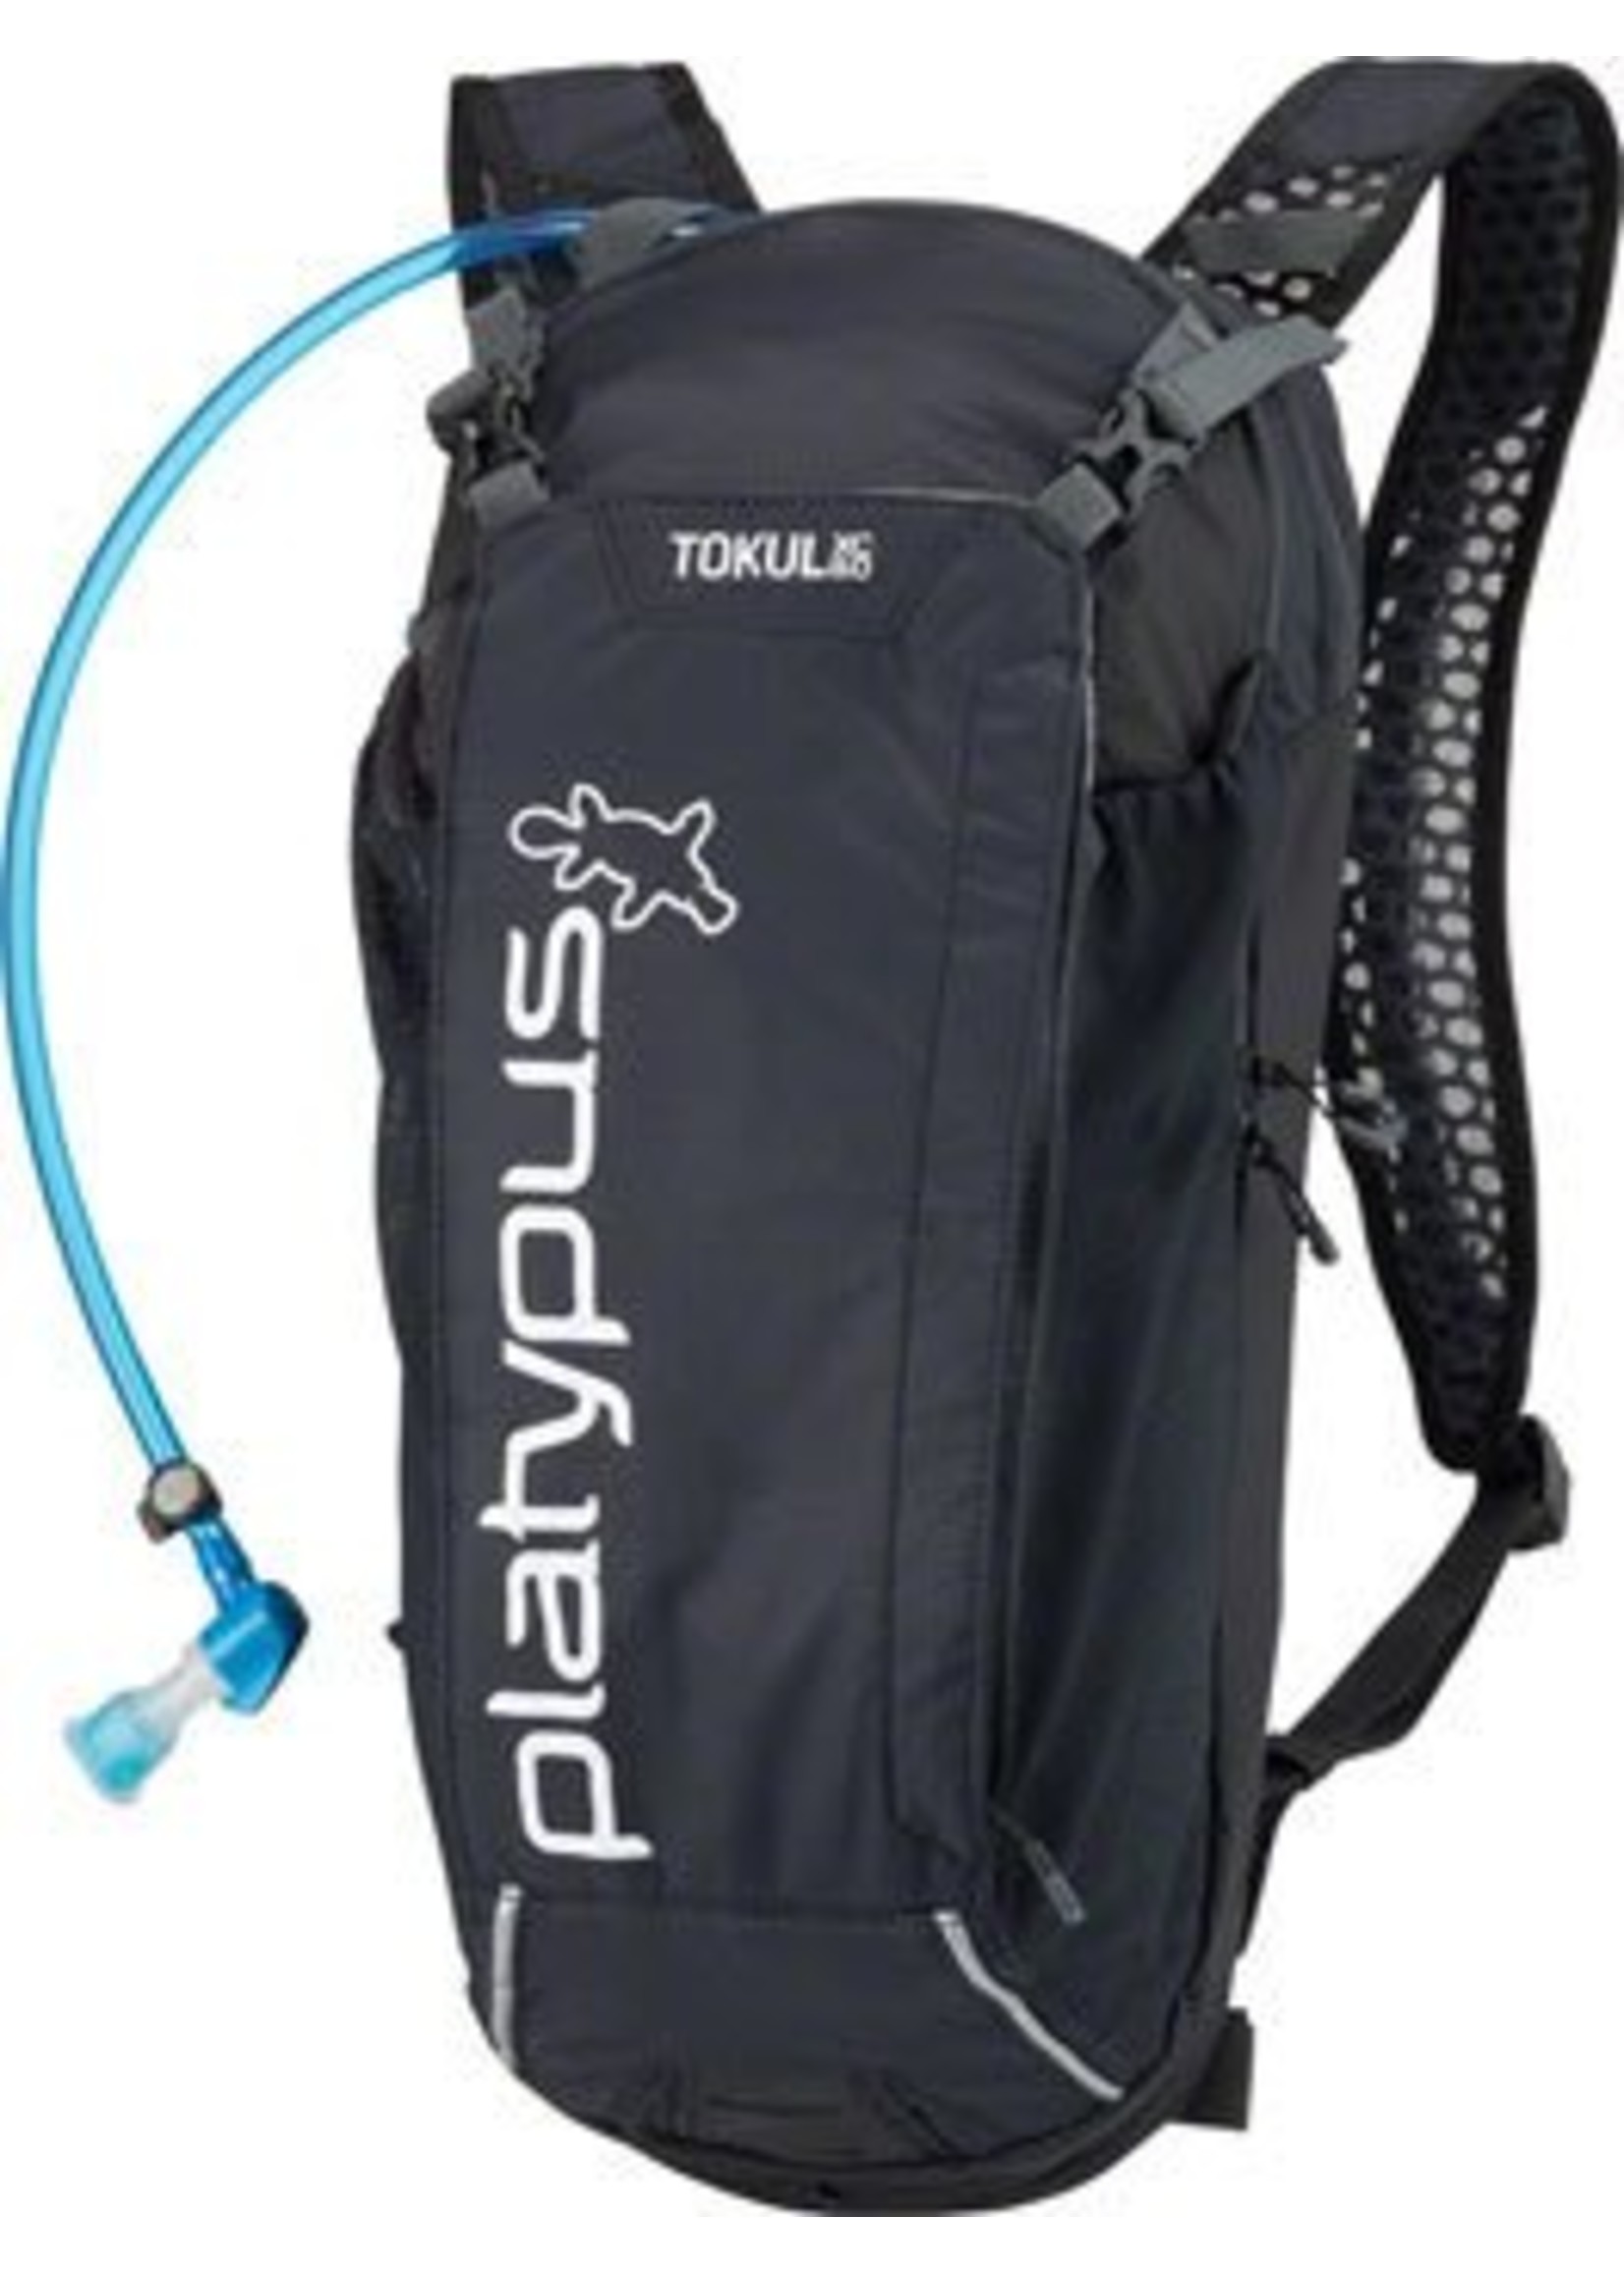 Platypus Tokul X.C. 8.0 Hydration Pack: Carbon